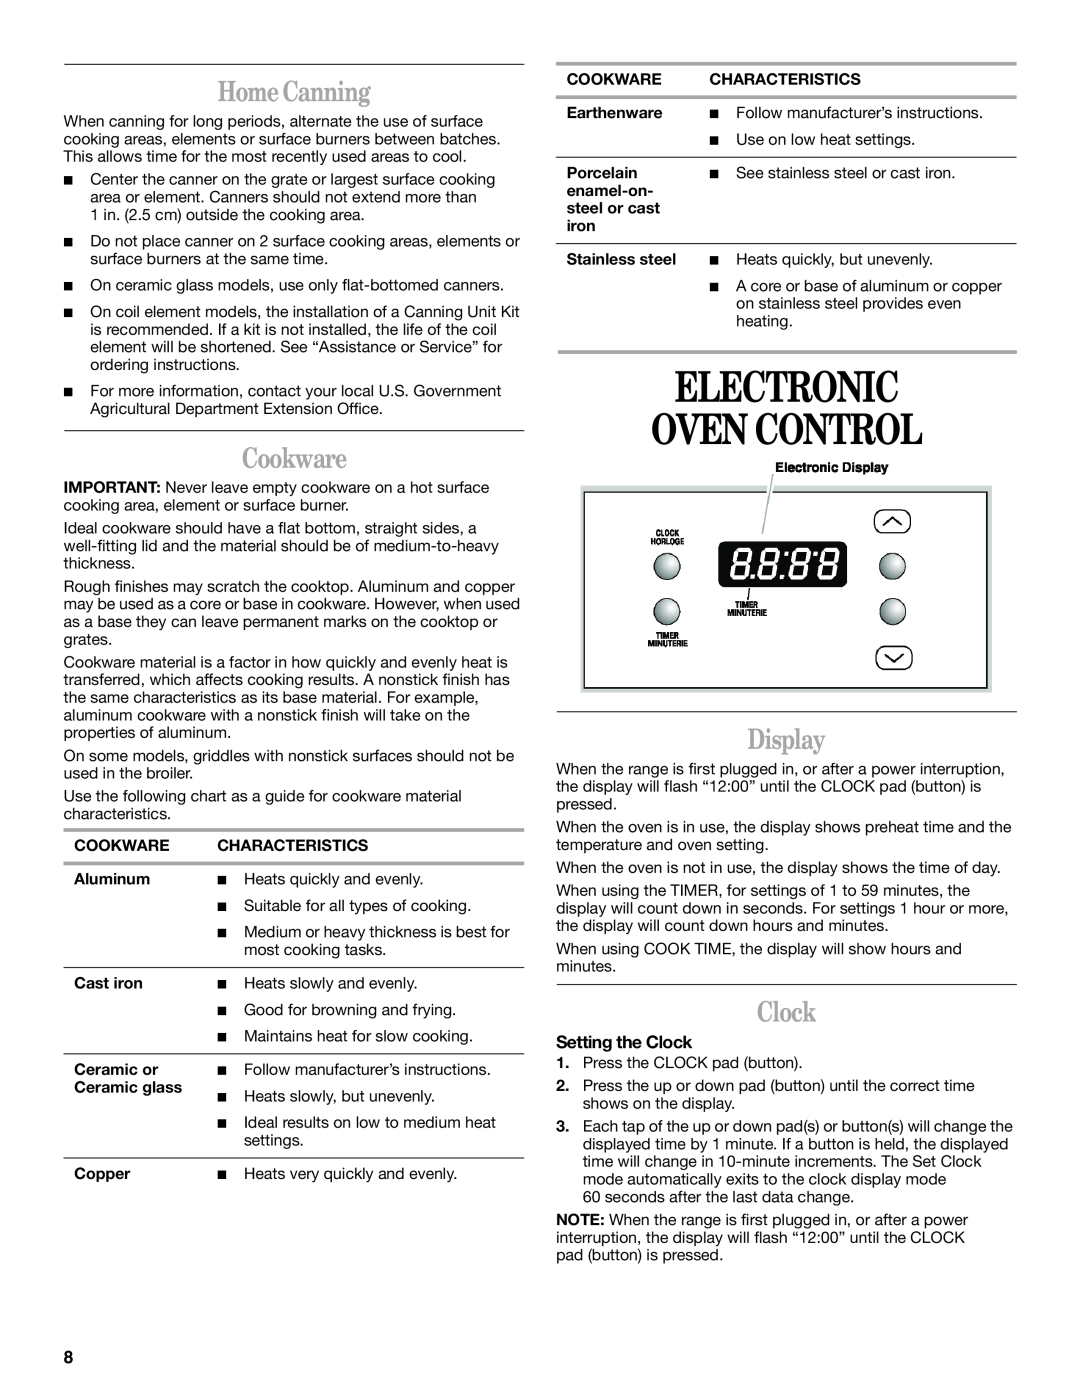 Whirlpool 9753313B manual Electronic Oven Control, Home Canning, Cookware, Display, Setting the Clock 